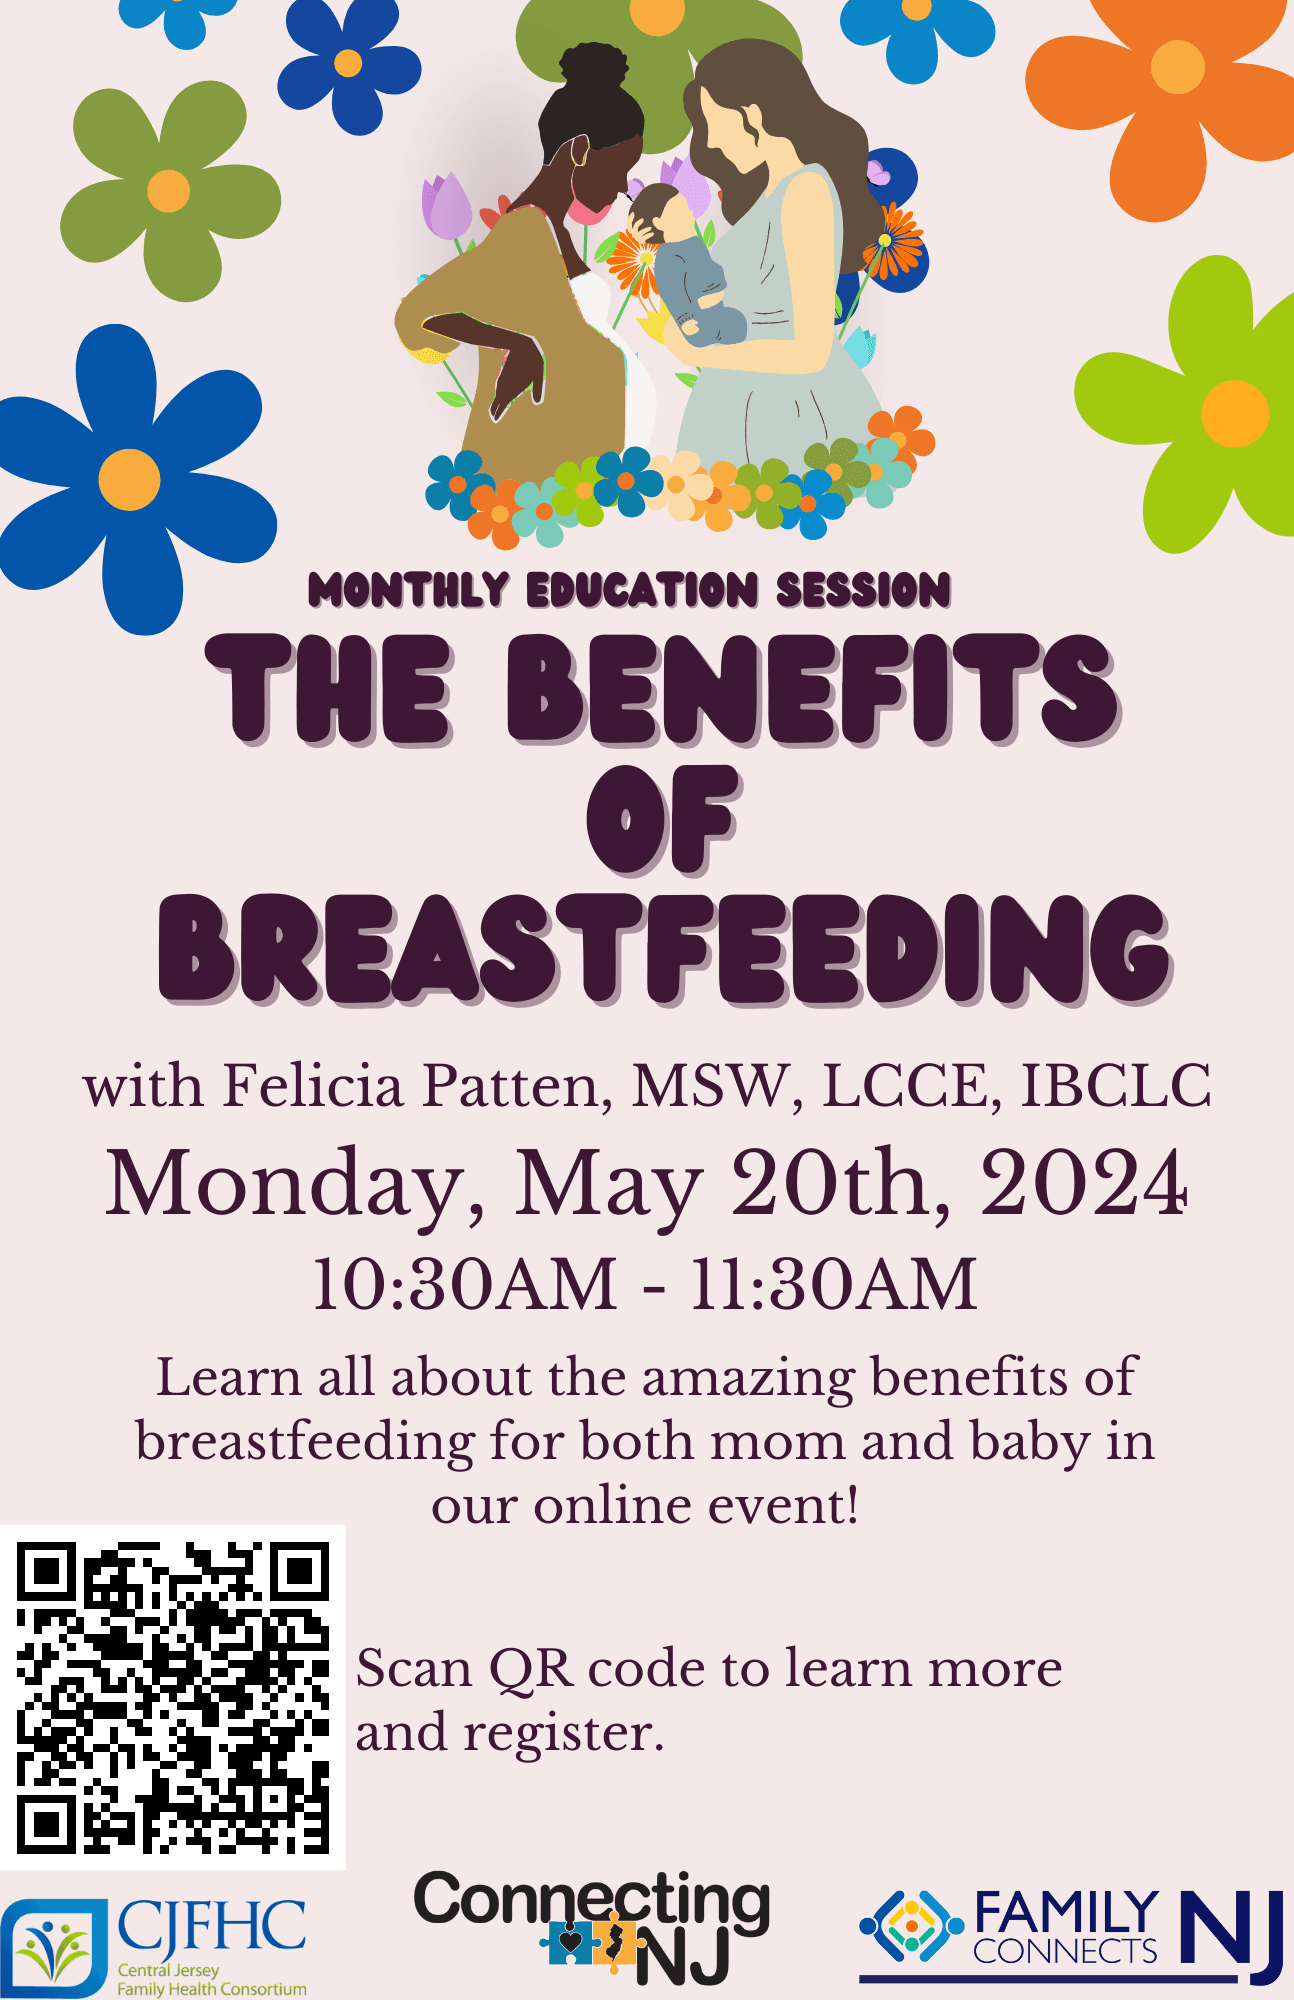 Connecting NJ to Host Breastfeeding Workshop on May 20